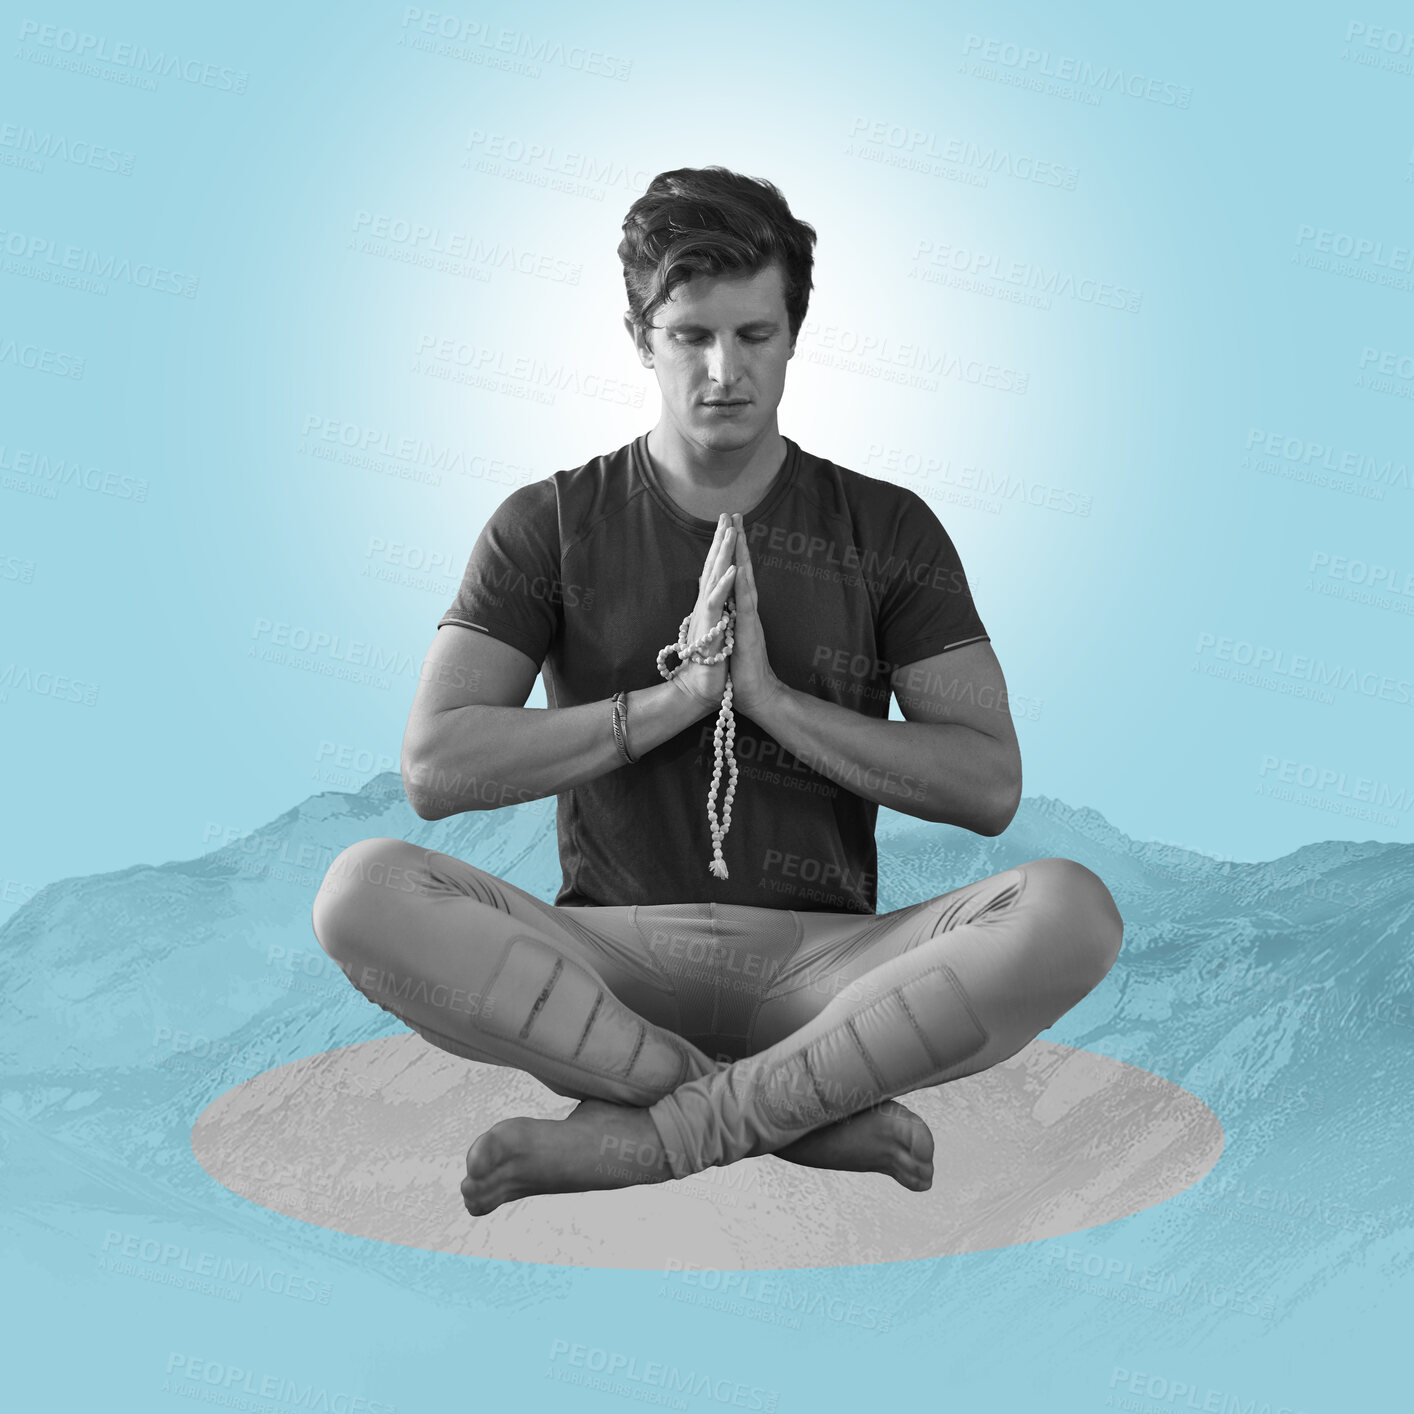 Buy stock photo Zen, meditation and man on poster, mountain on blue background and yoga pose in balance. Art, advertising and creative collage design for health, wellness and calm, spiritual lifestyle studio mock up